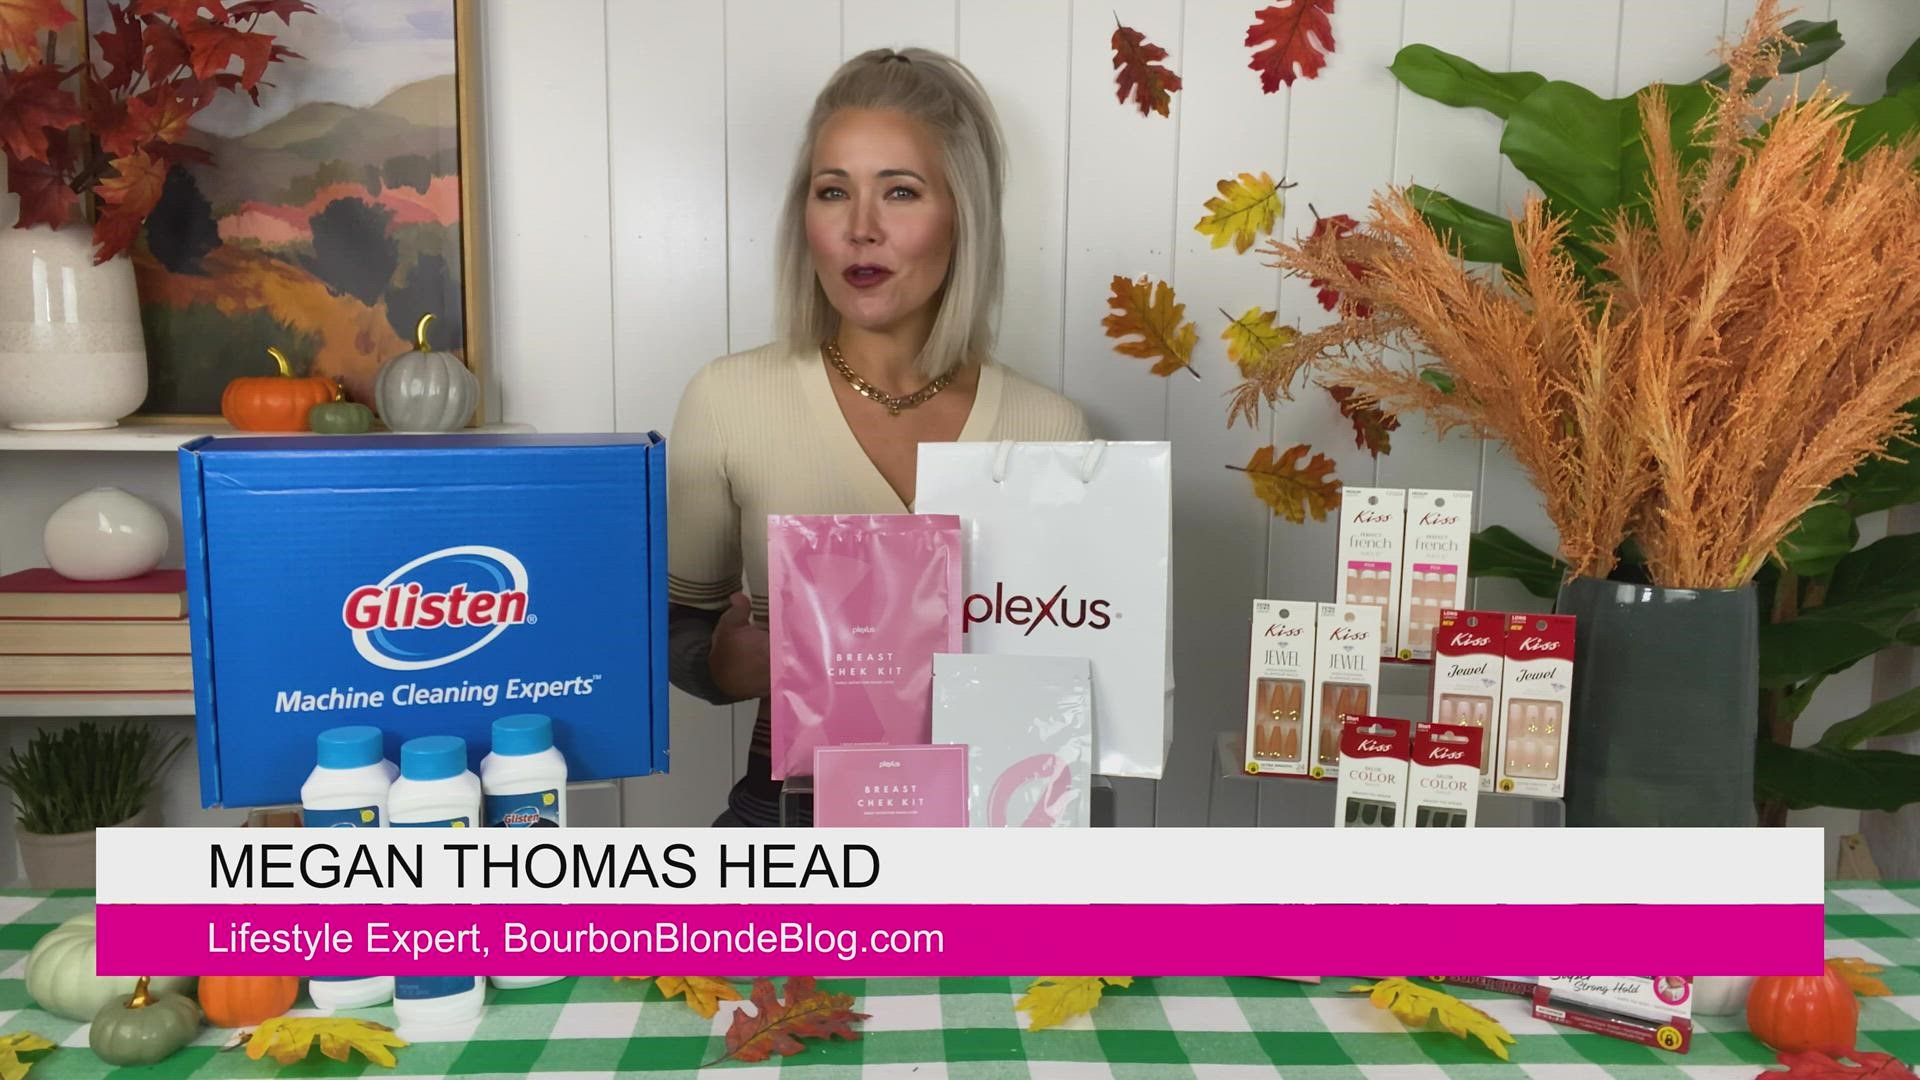 Lifestyle Expert Megan Thomas Head is here to share a few products that are great for all your beauty, health and wellness needs.